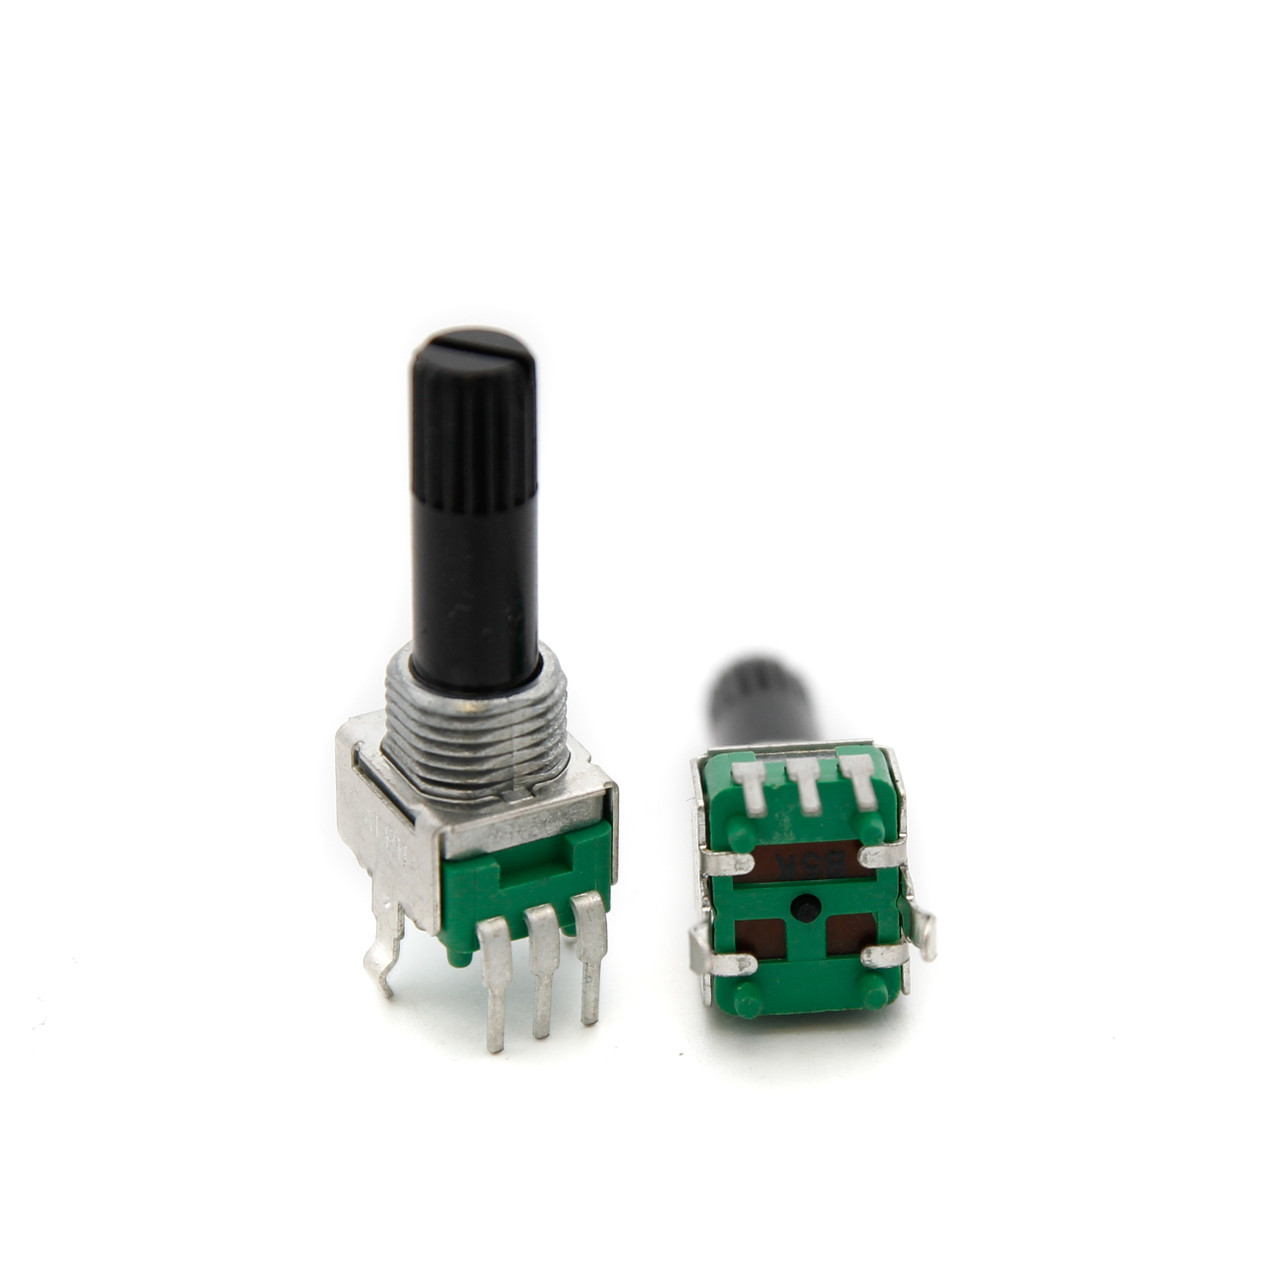 9mm "Snap-In" Potentiometer - Long Knurled Shaft